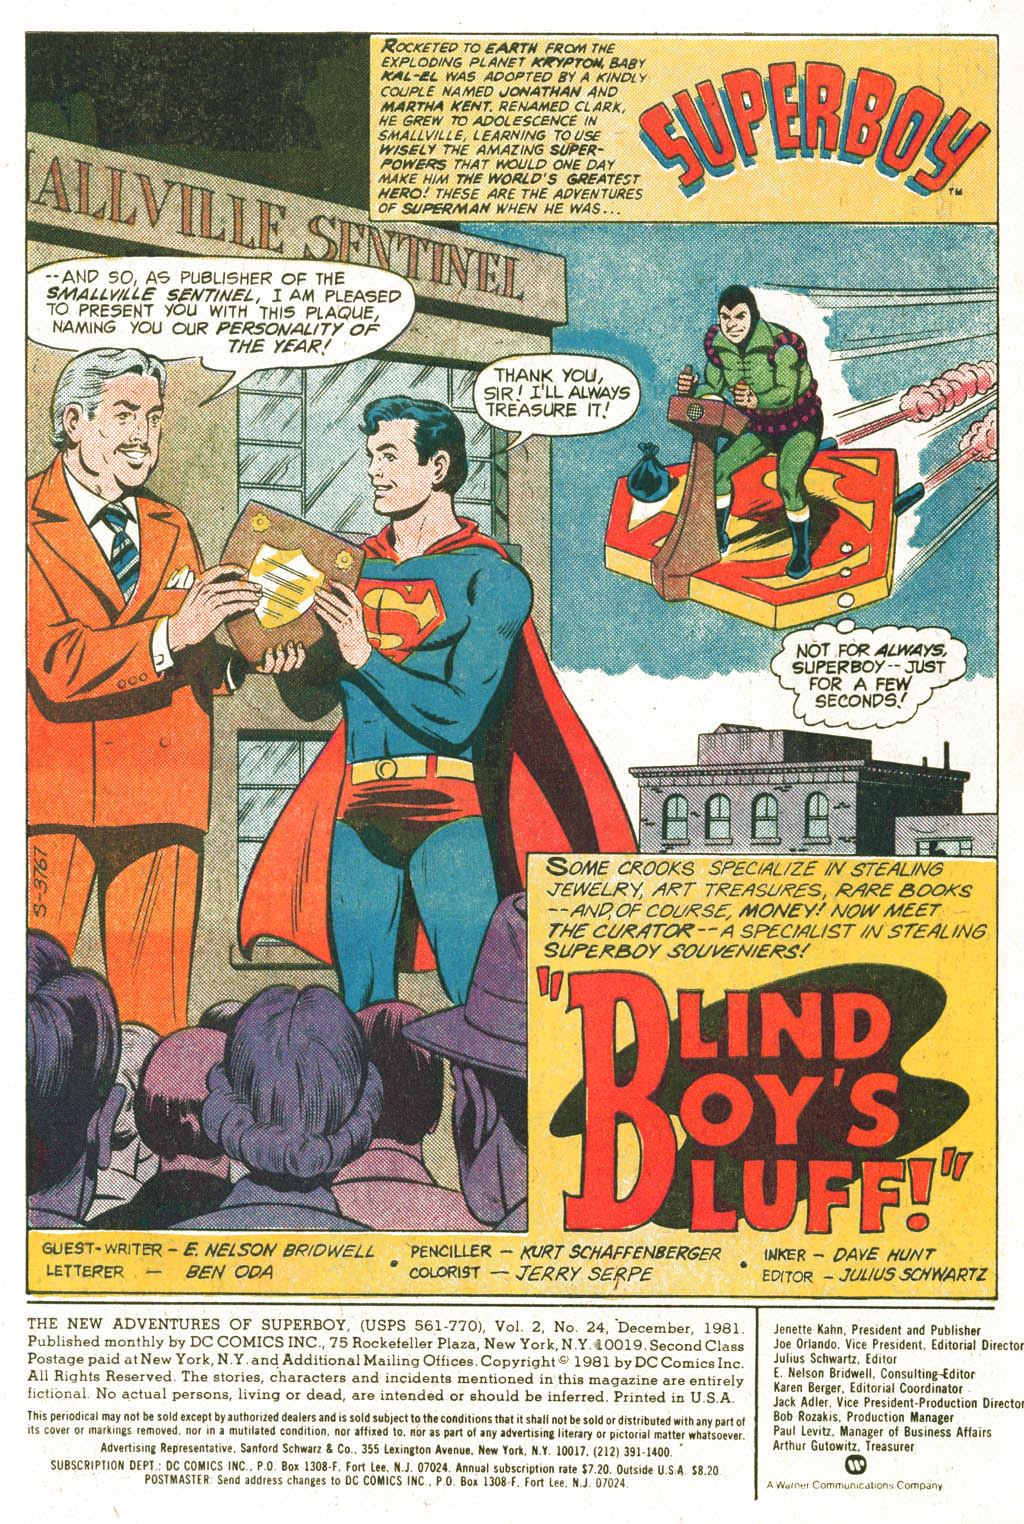 The New Adventures of Superboy 24 Page 1